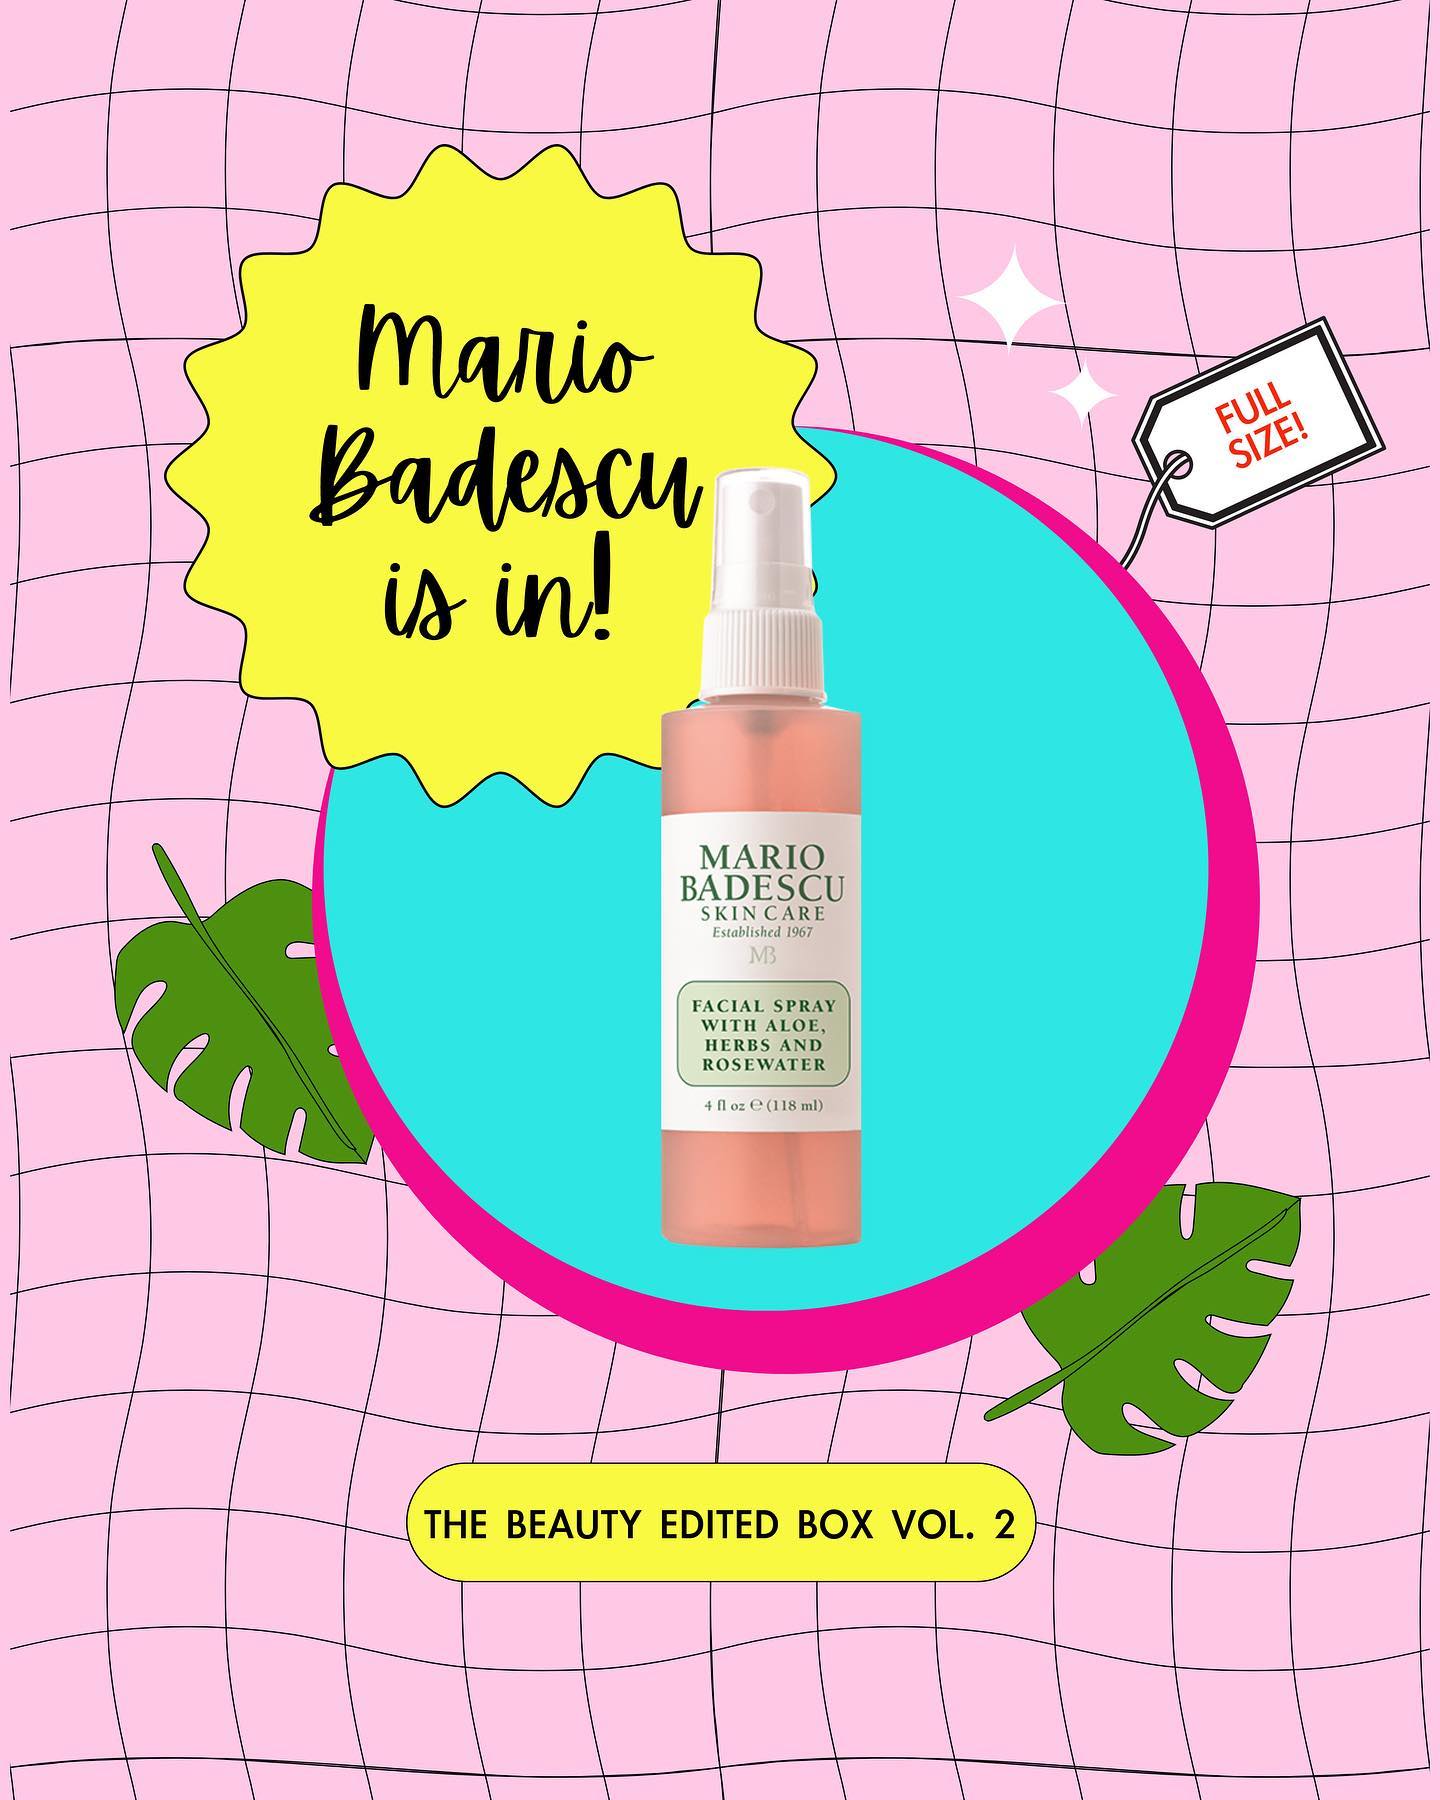 MARIO BADESCU IS IN!<br />
First...